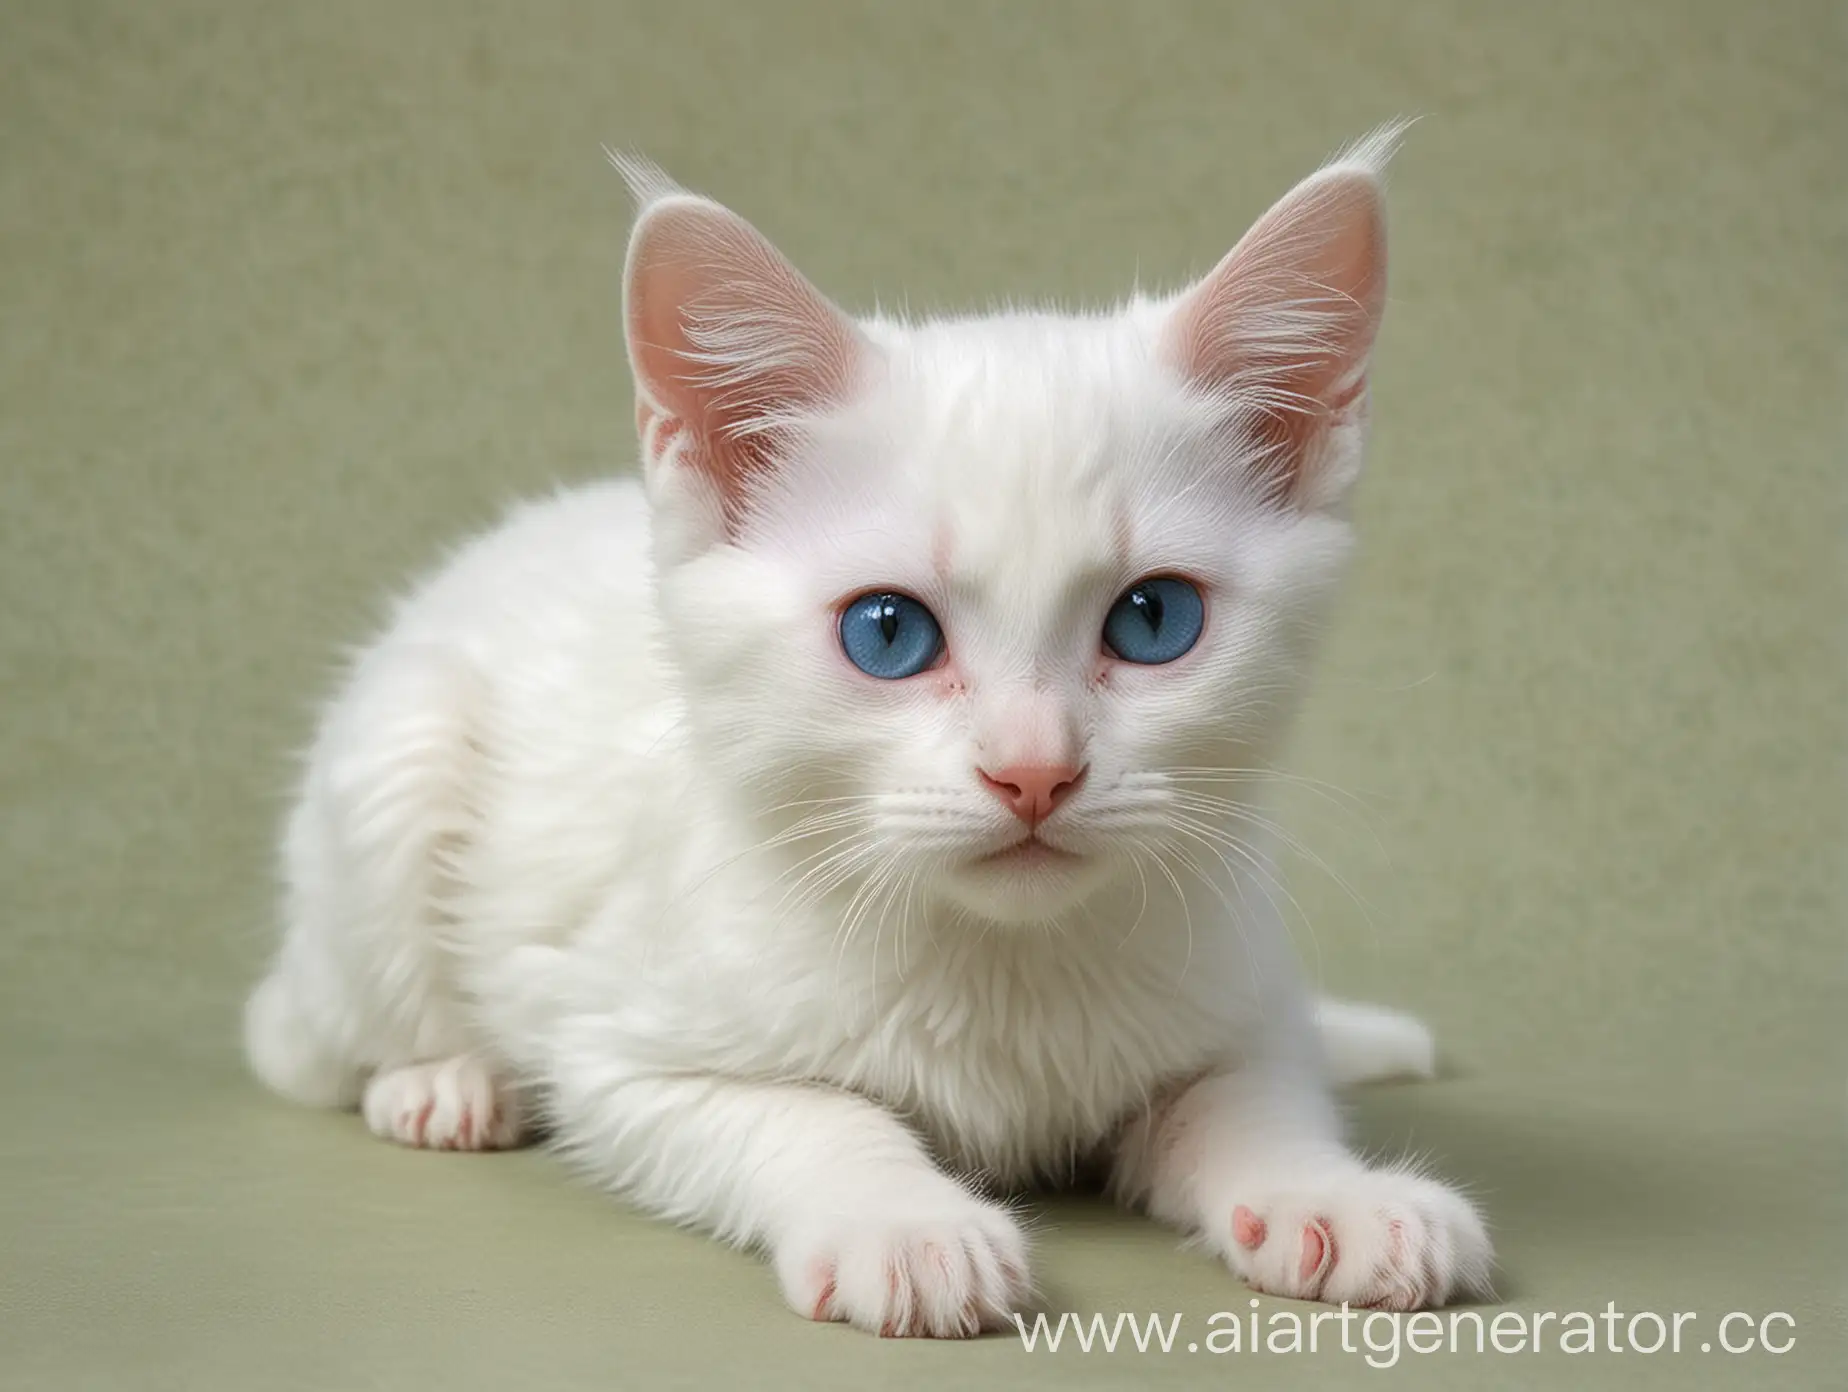 Adorable-White-Kitten-with-Four-Tails-and-Heterochromatic-Eyes